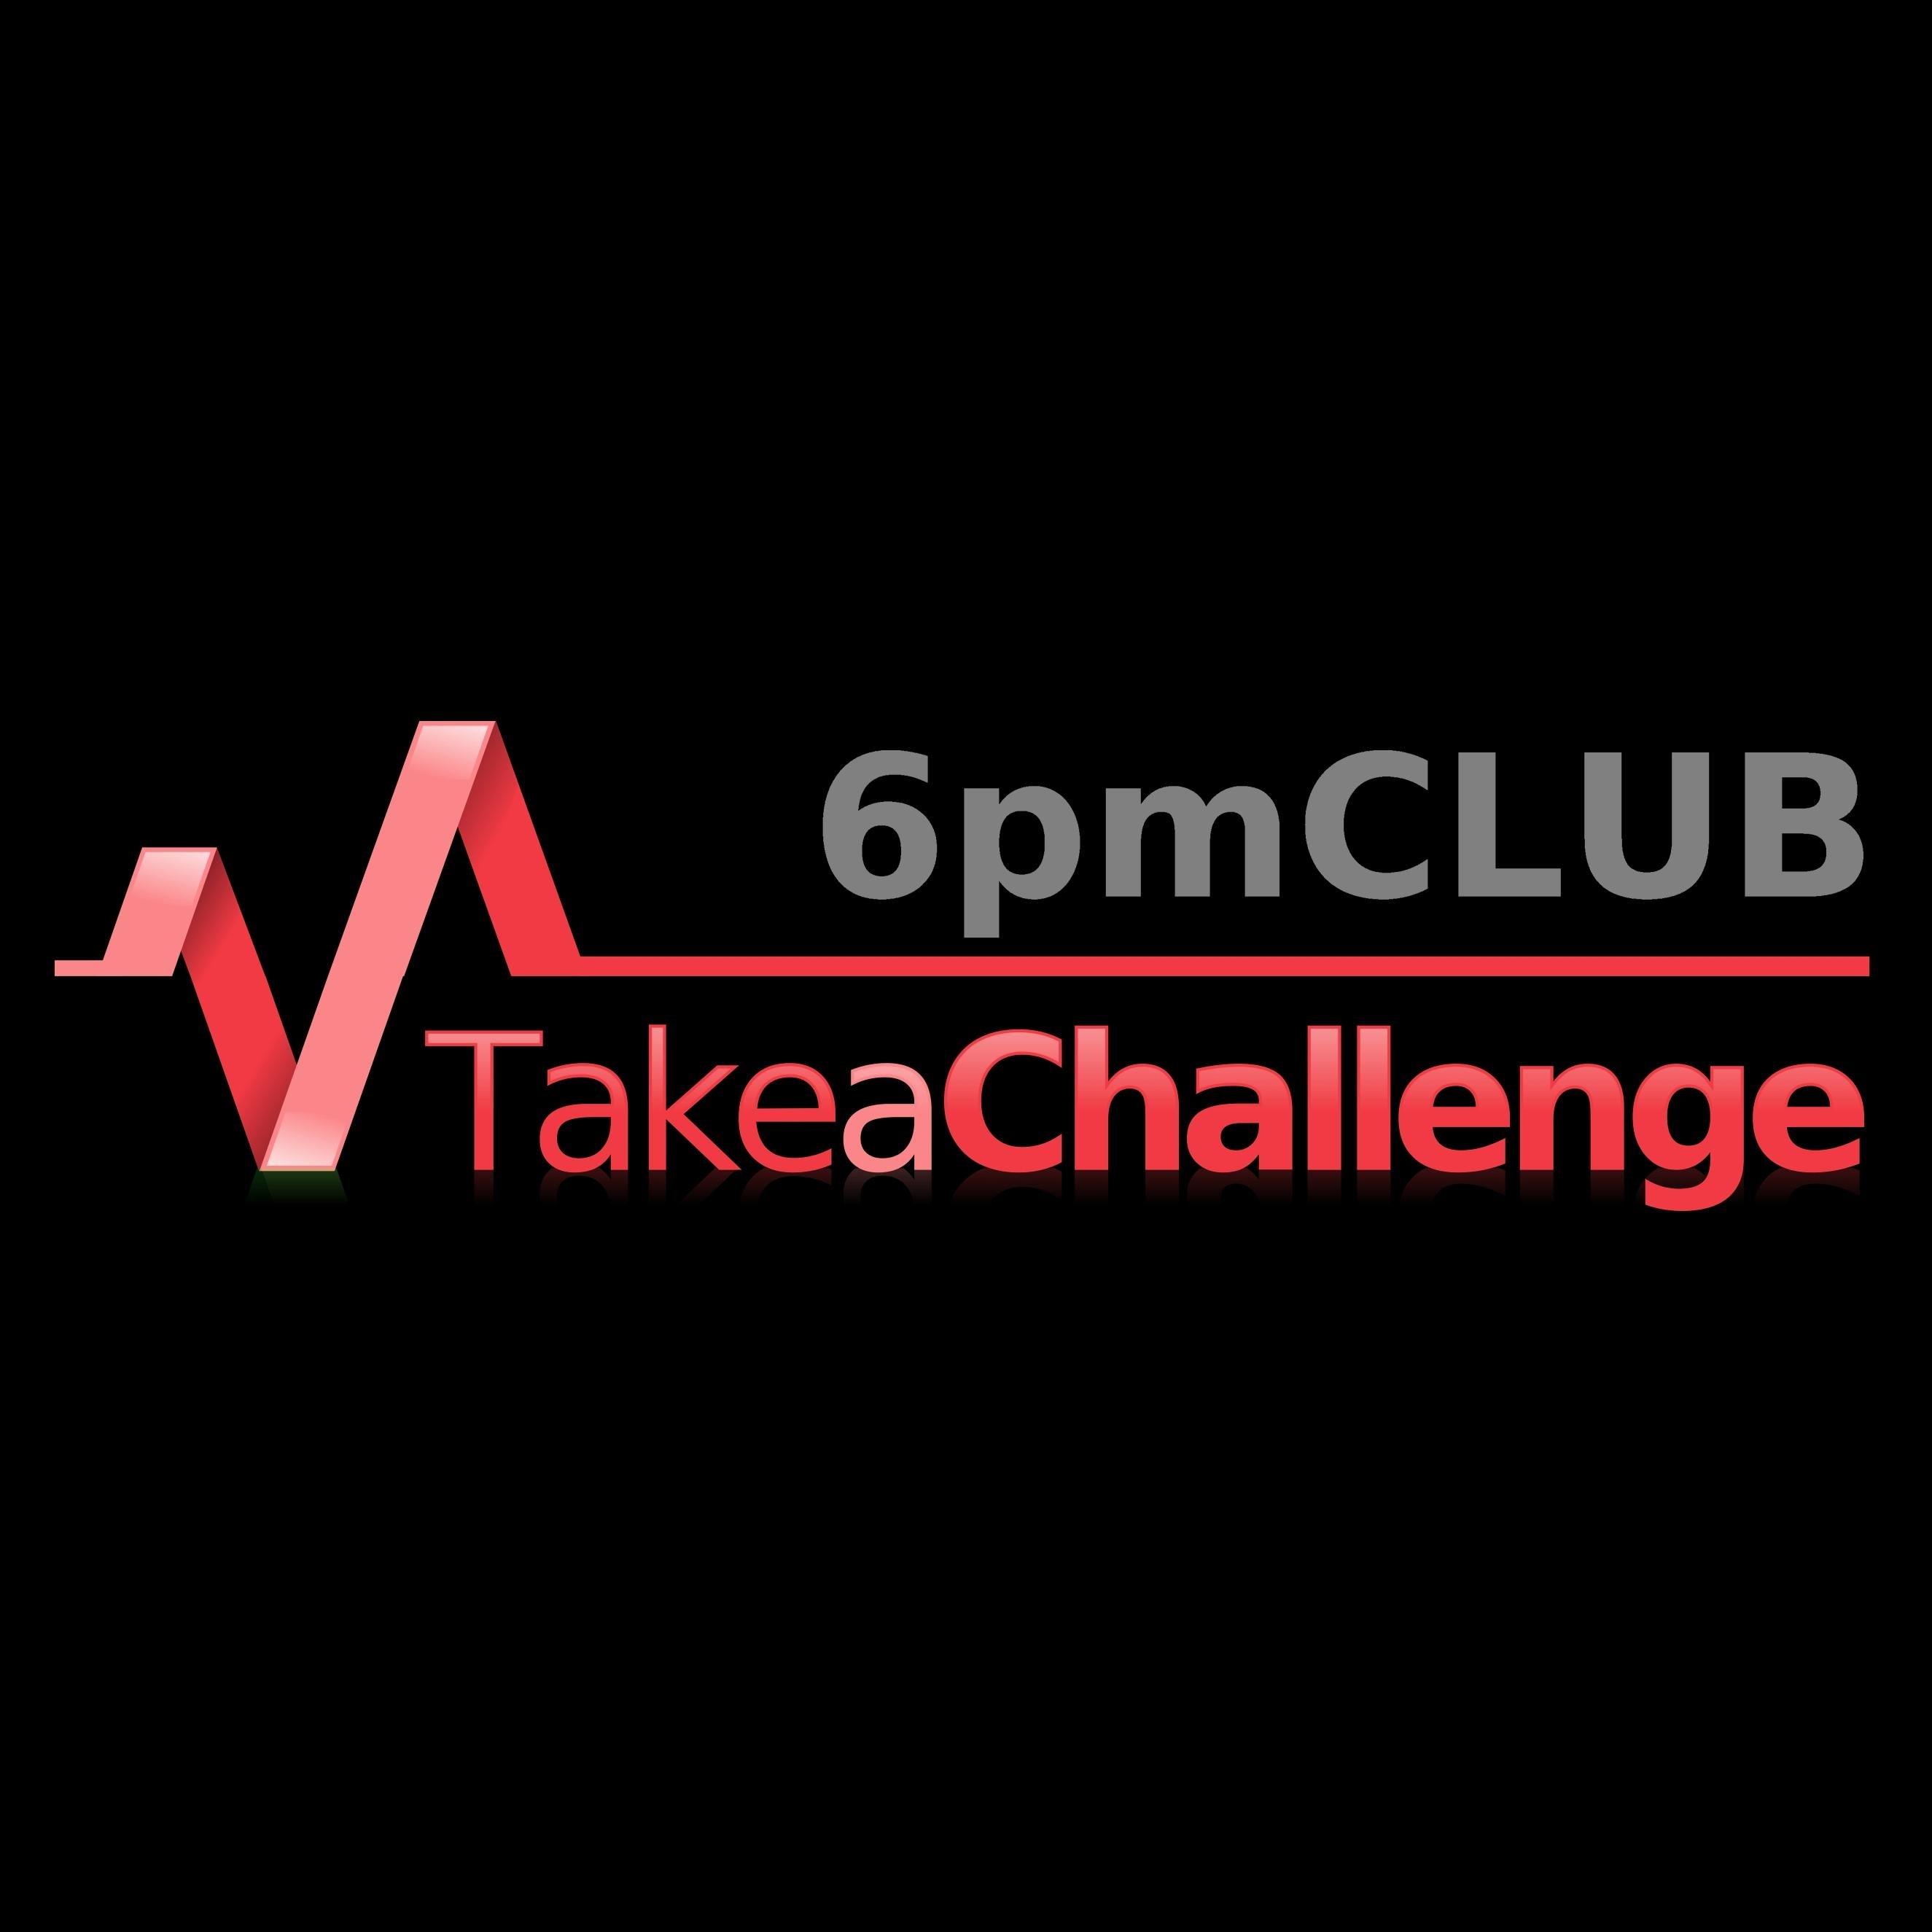 Work is over, time for #6pmCLUB challenge, get energized, de-stress & eat healthy, wrap up your day feeling awesome.